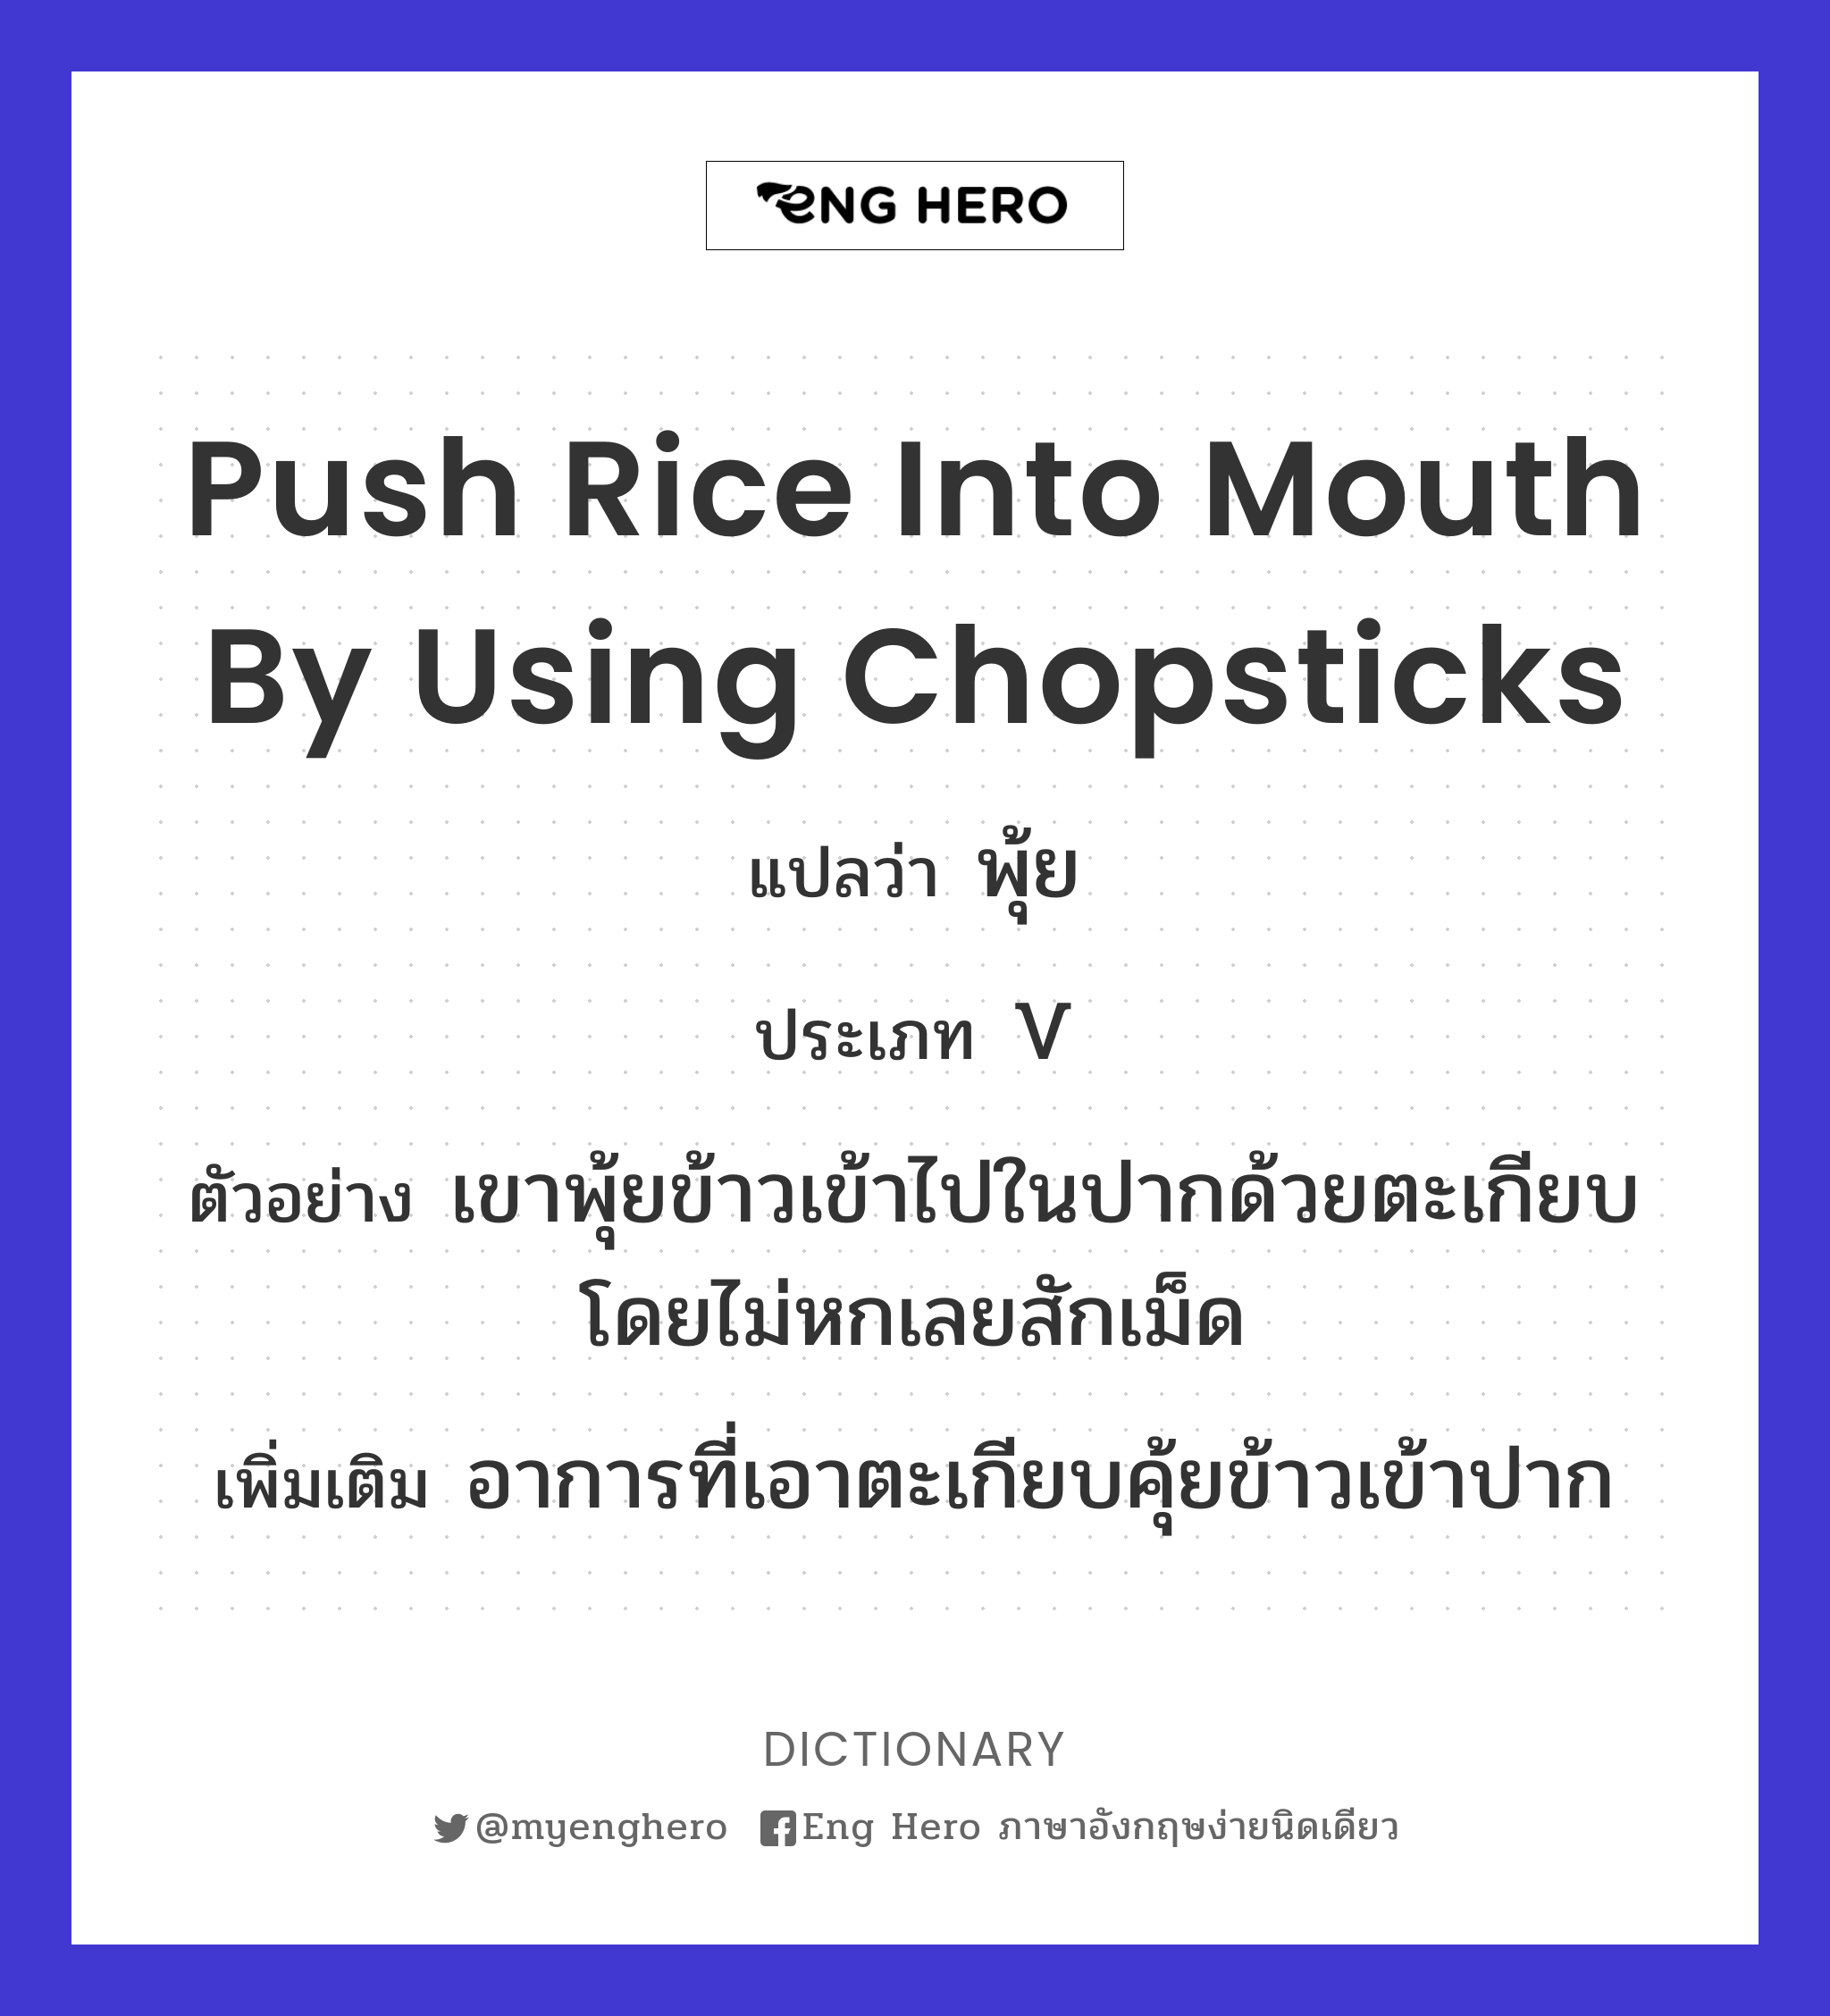 push rice into mouth by using chopsticks